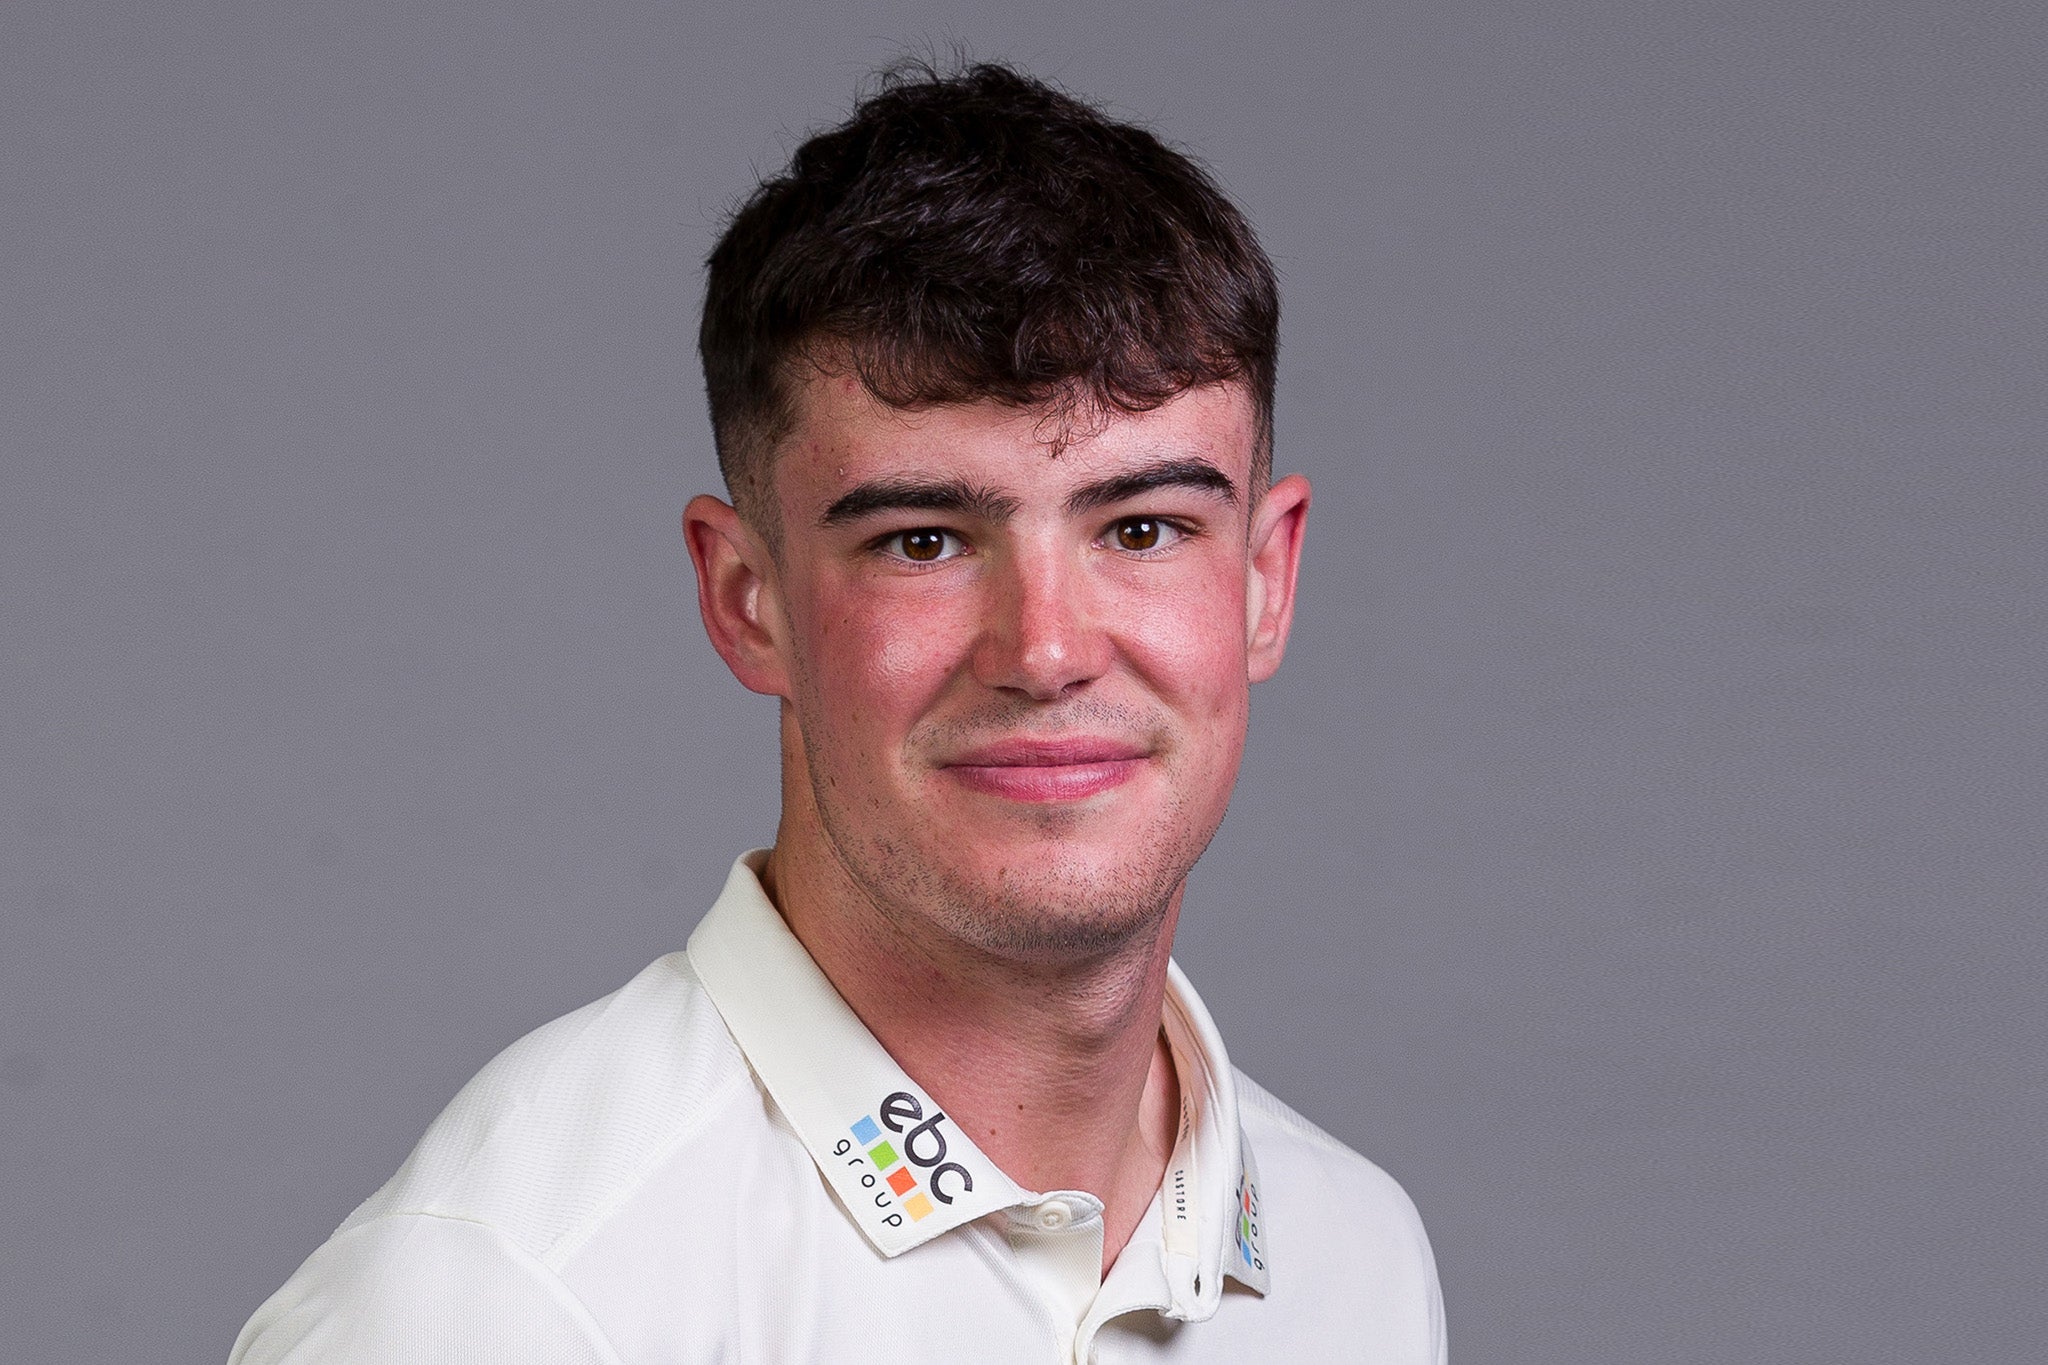 Worcestershire bowler Josh Baker has died aged 20